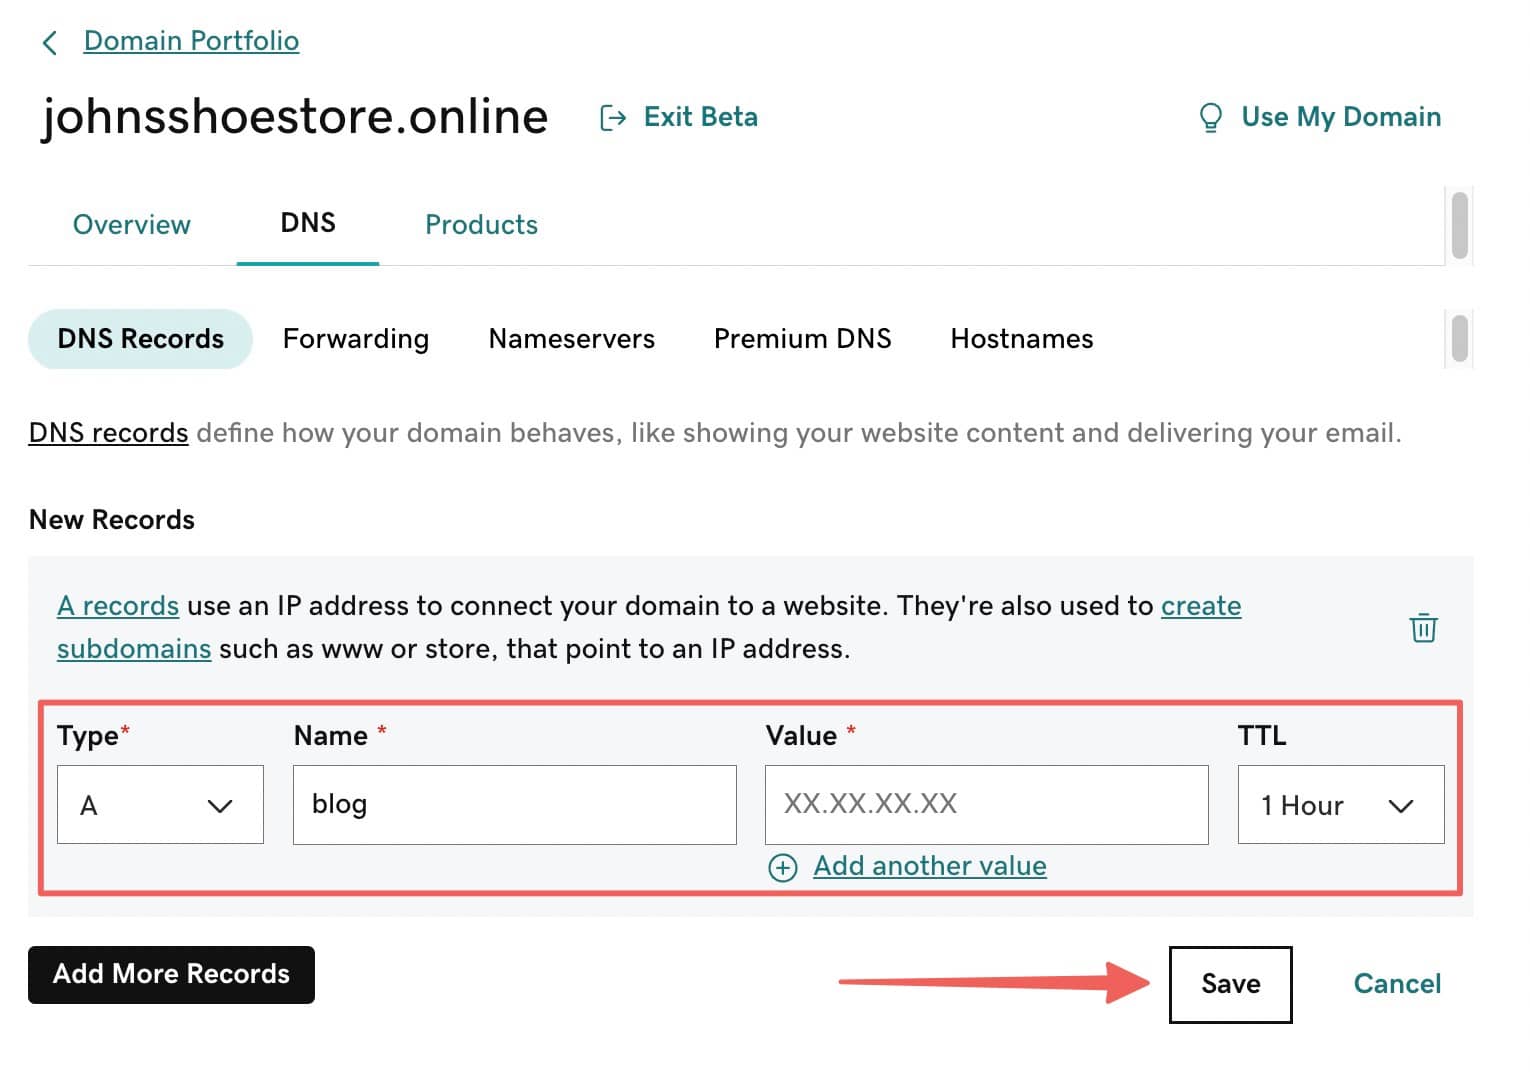 How to create subdomain in GoDaddy: Type A DNS record creation.